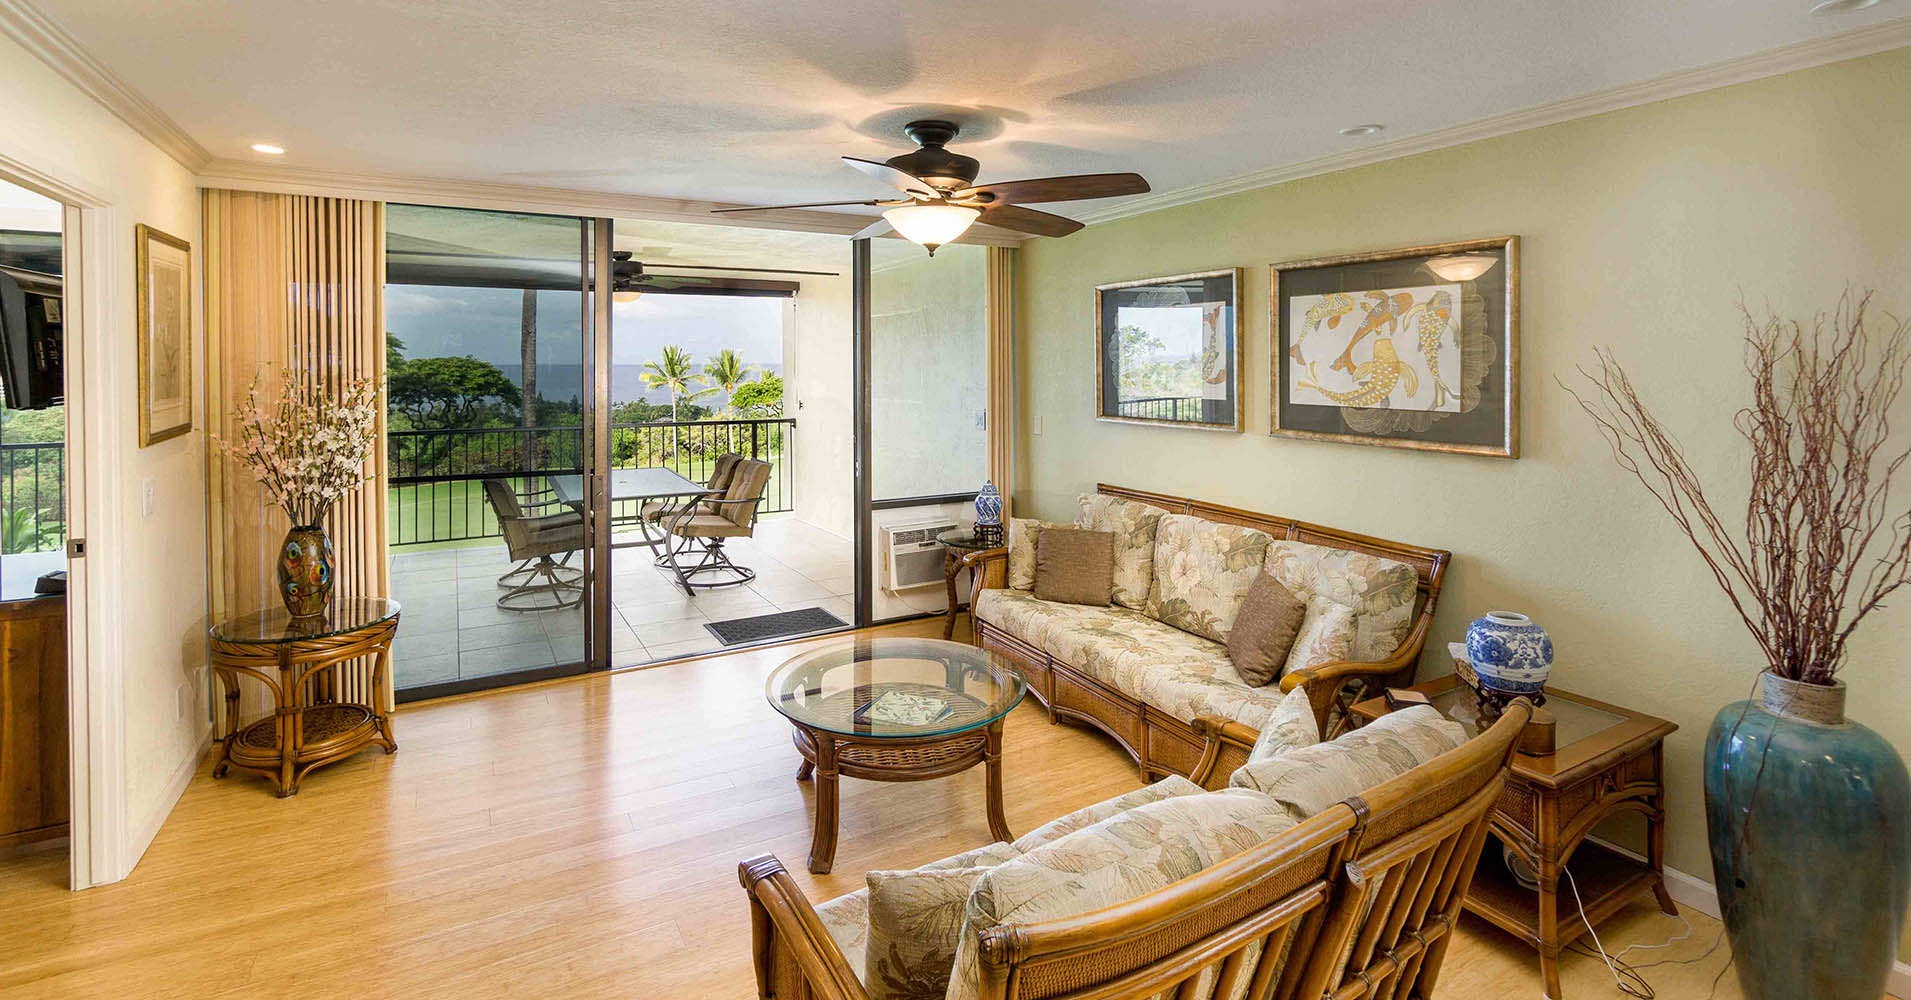 Spacious living room with lanai access